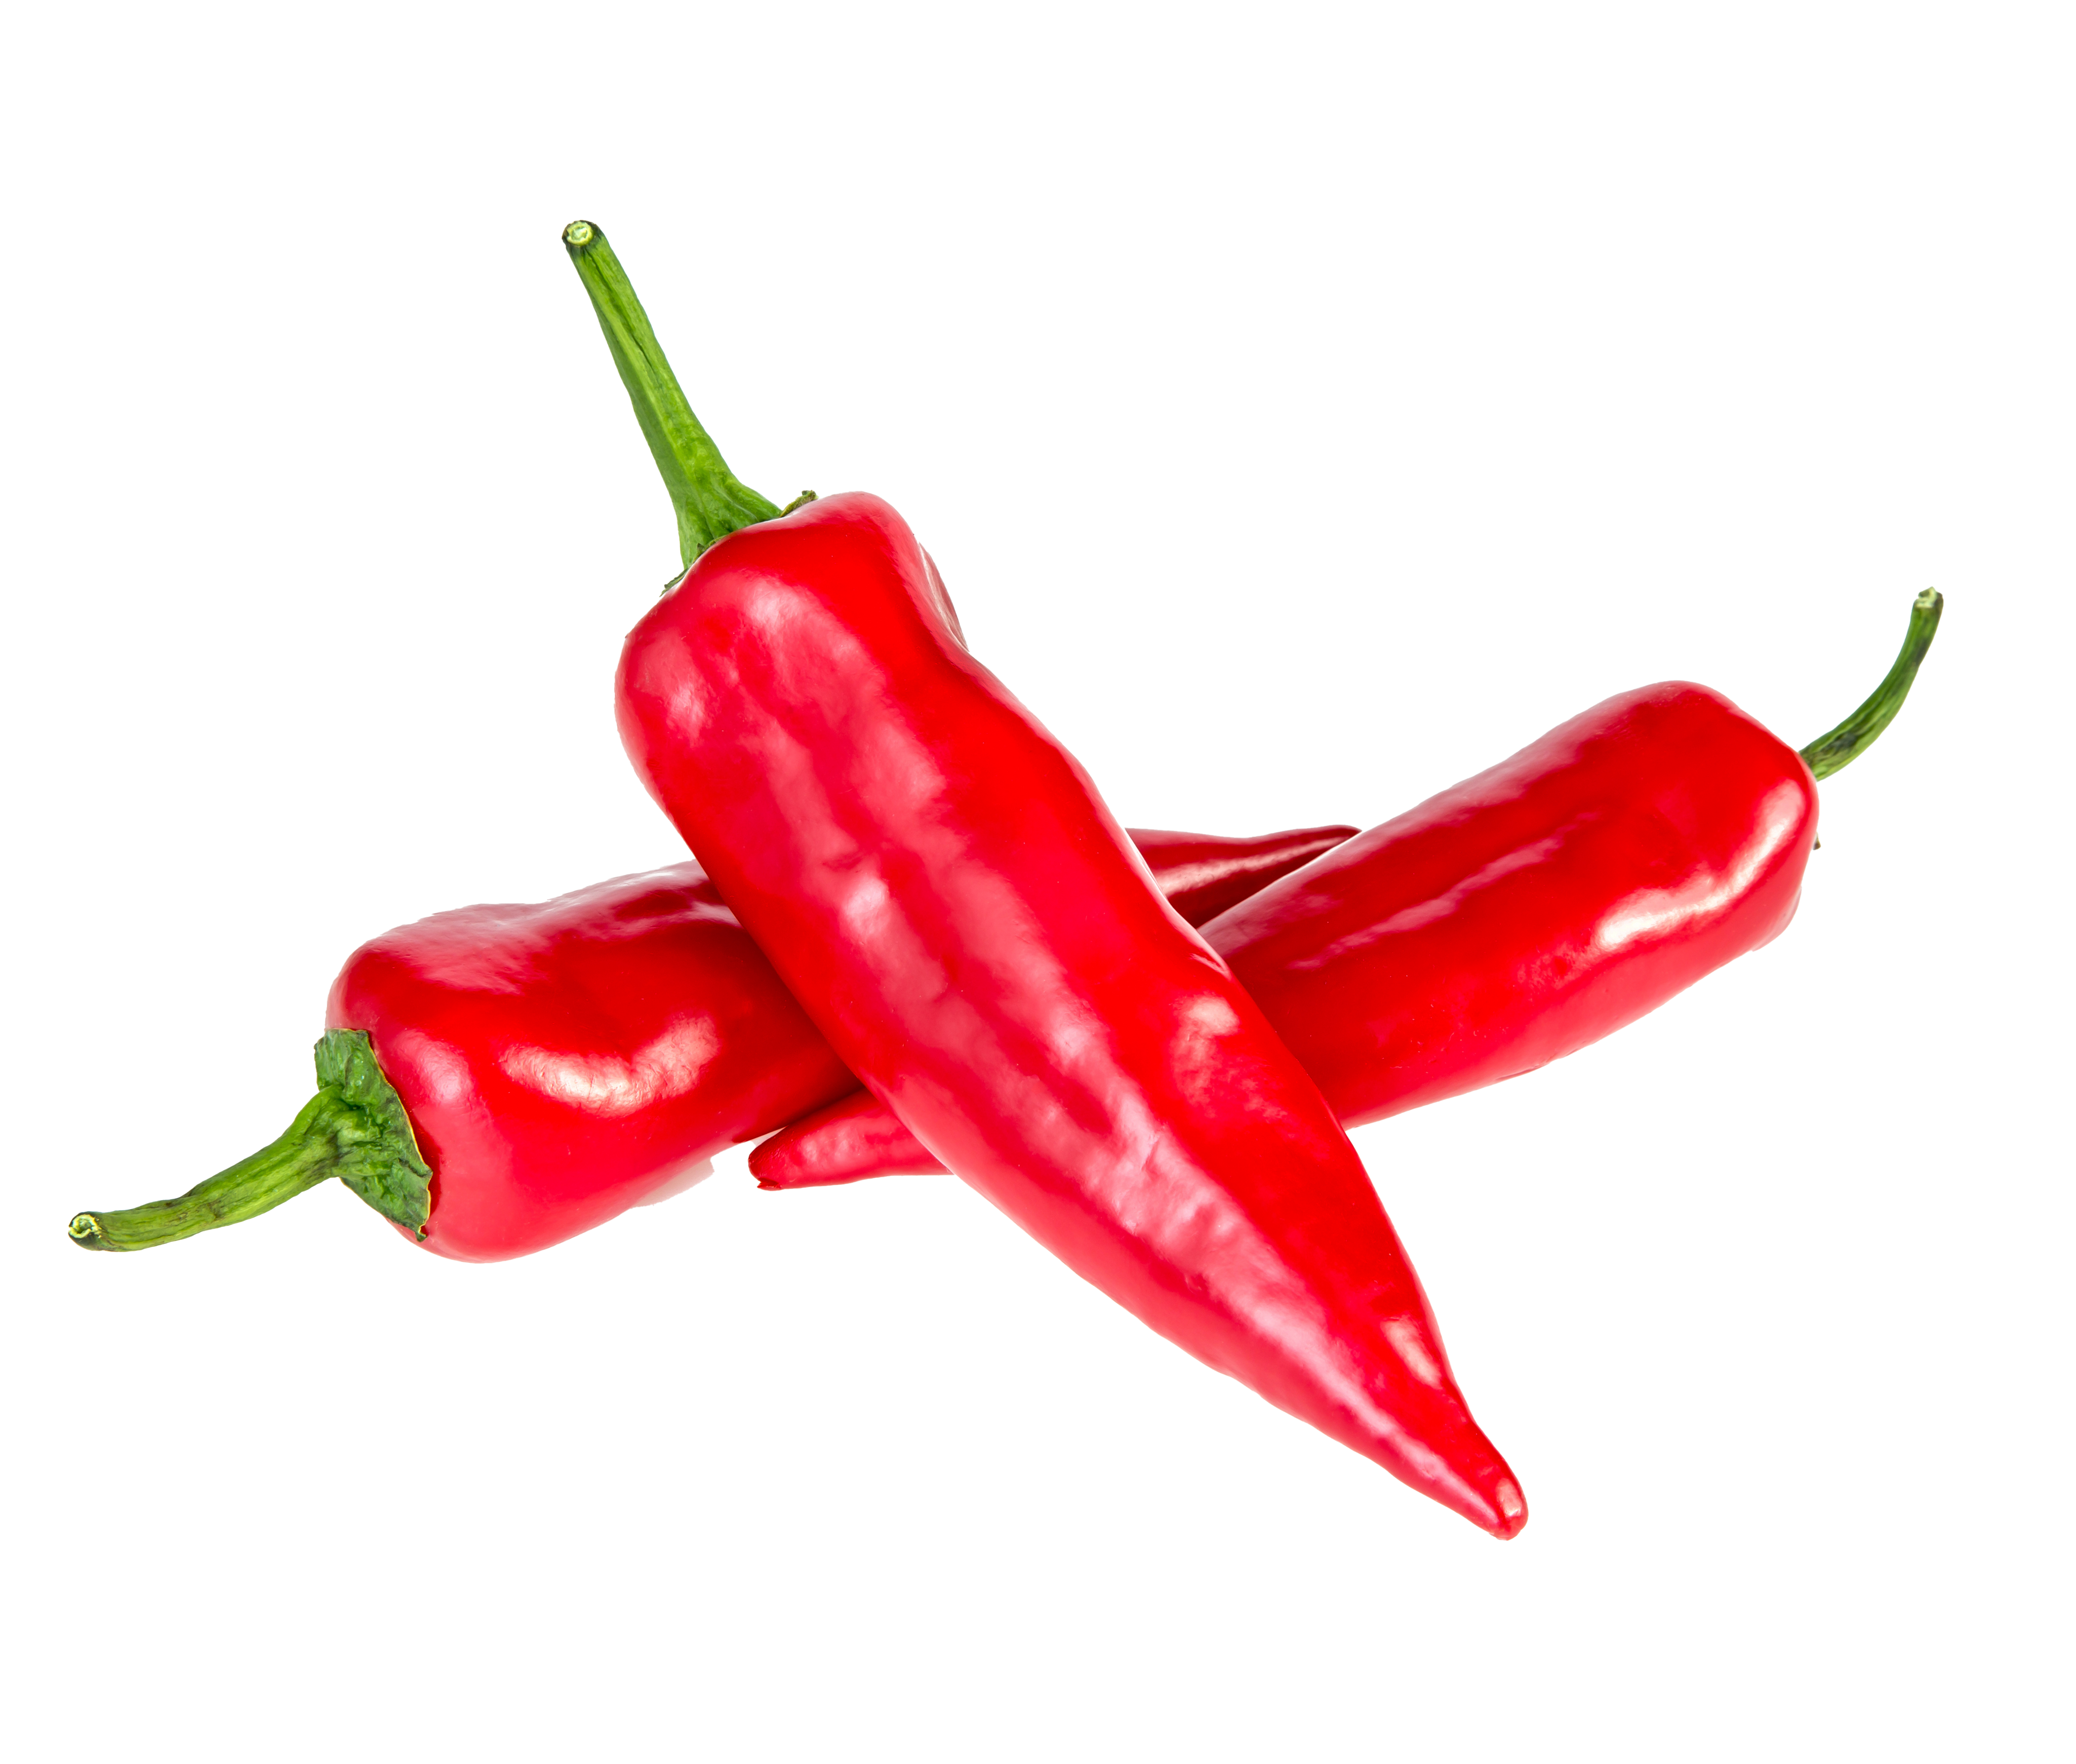 Red_Chile_ebe3739b-43c6-48a5-ae23-aedd96fe5784.png